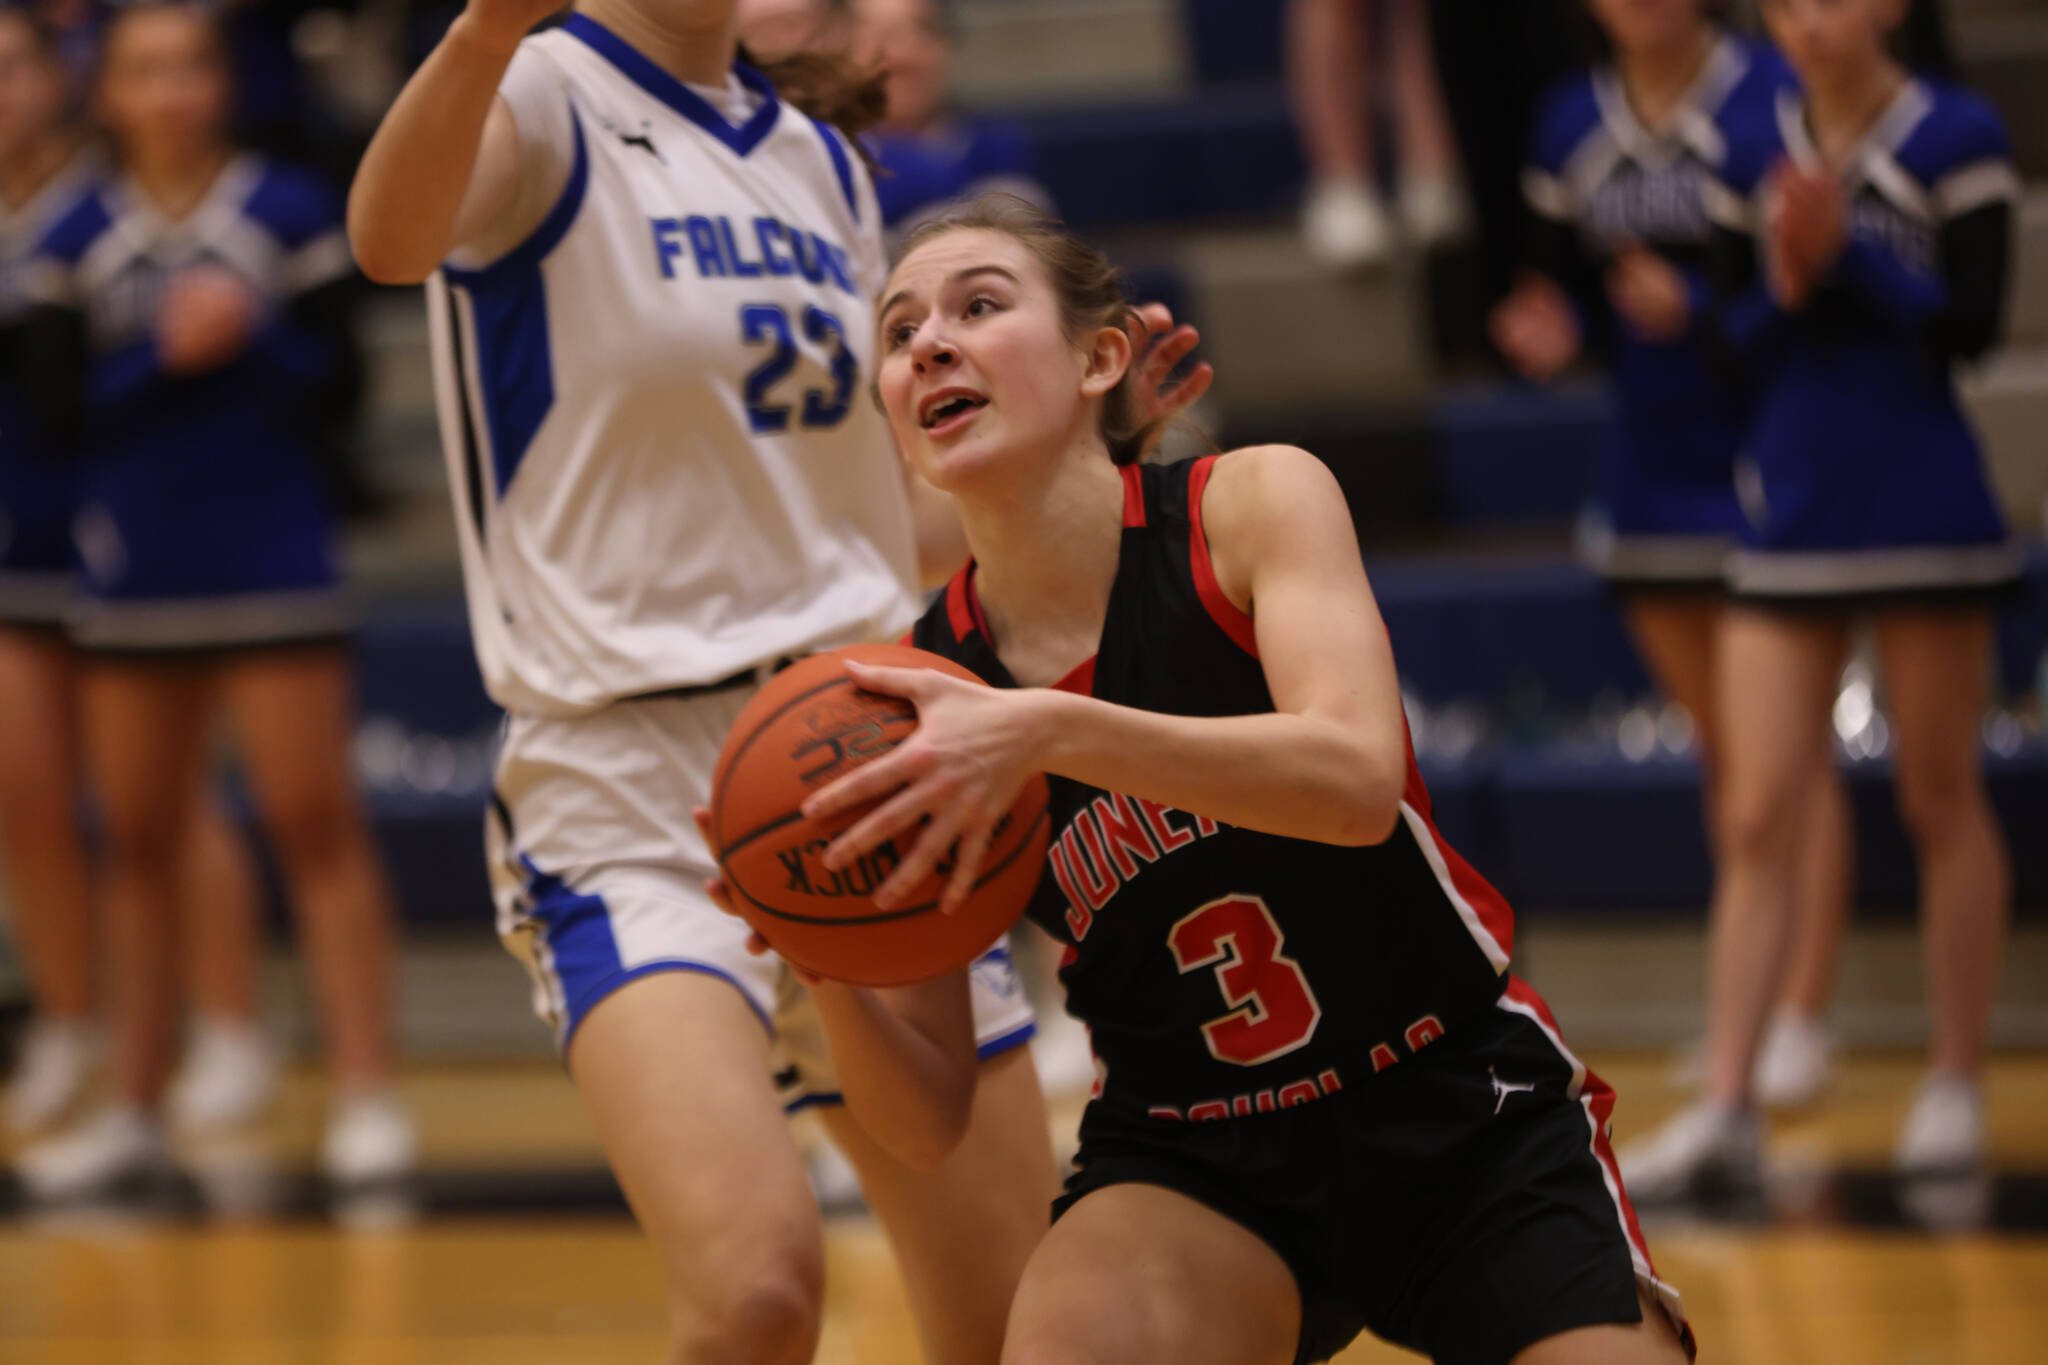 JDHS senior Carlynn Casperson takes a shot against TMHS during a conference game earlier this season. The Lady Falcons are the number one seed in conference for this year’s Region V tournament. (Ben Hohenstatt / Juneau Empire)